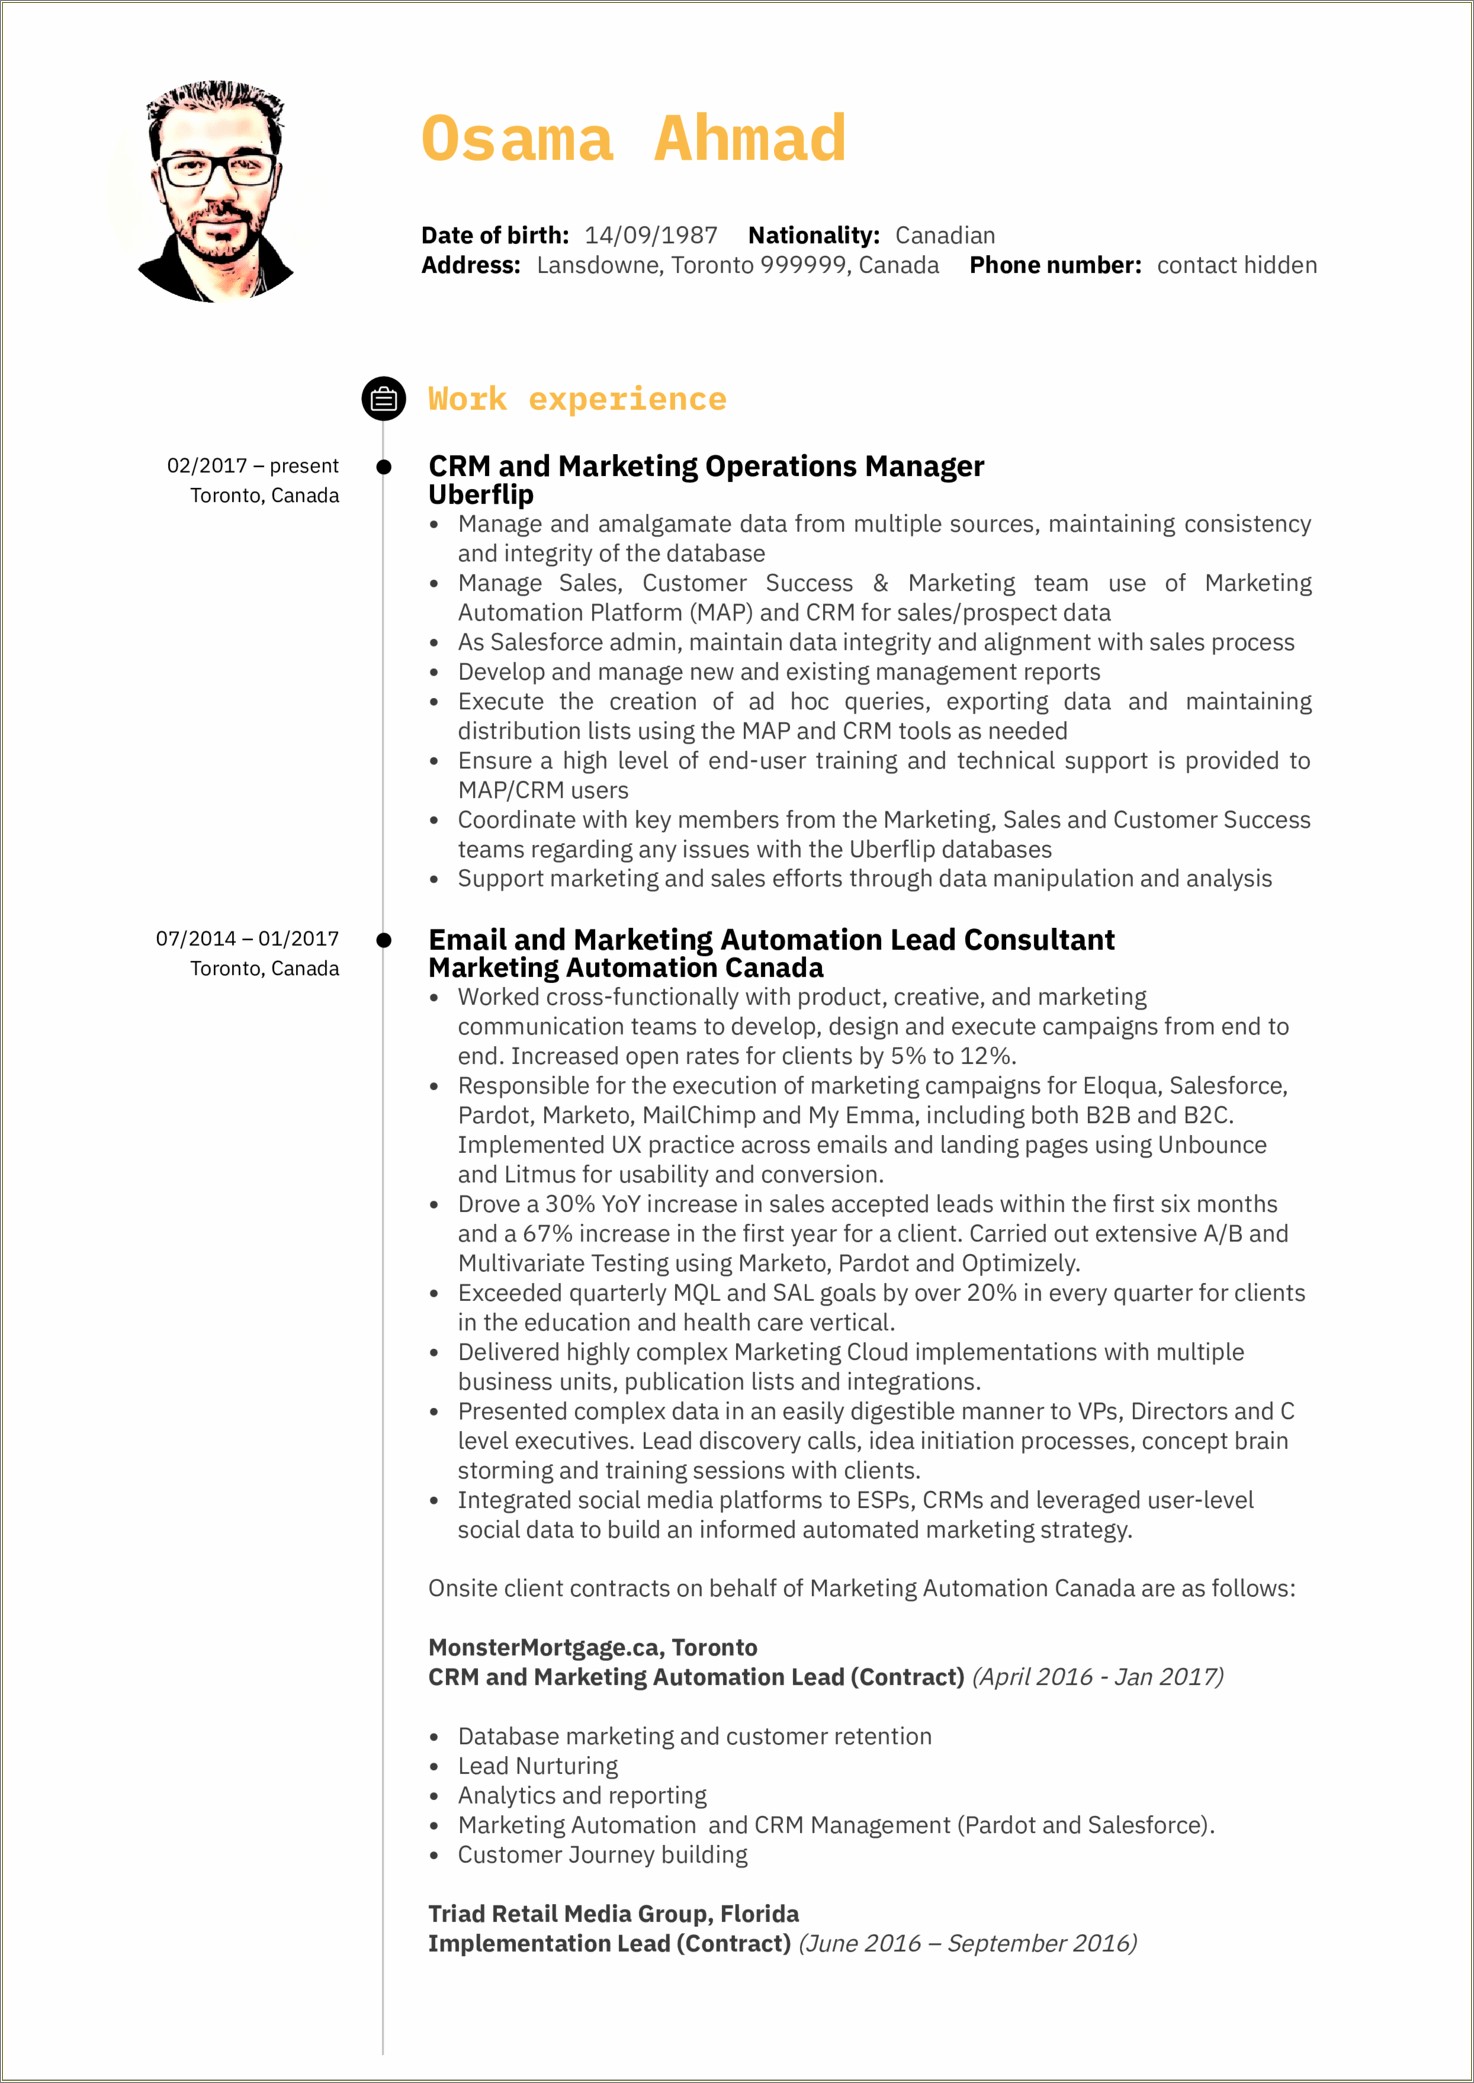 Construction Firm Operational Manager Sample Resume